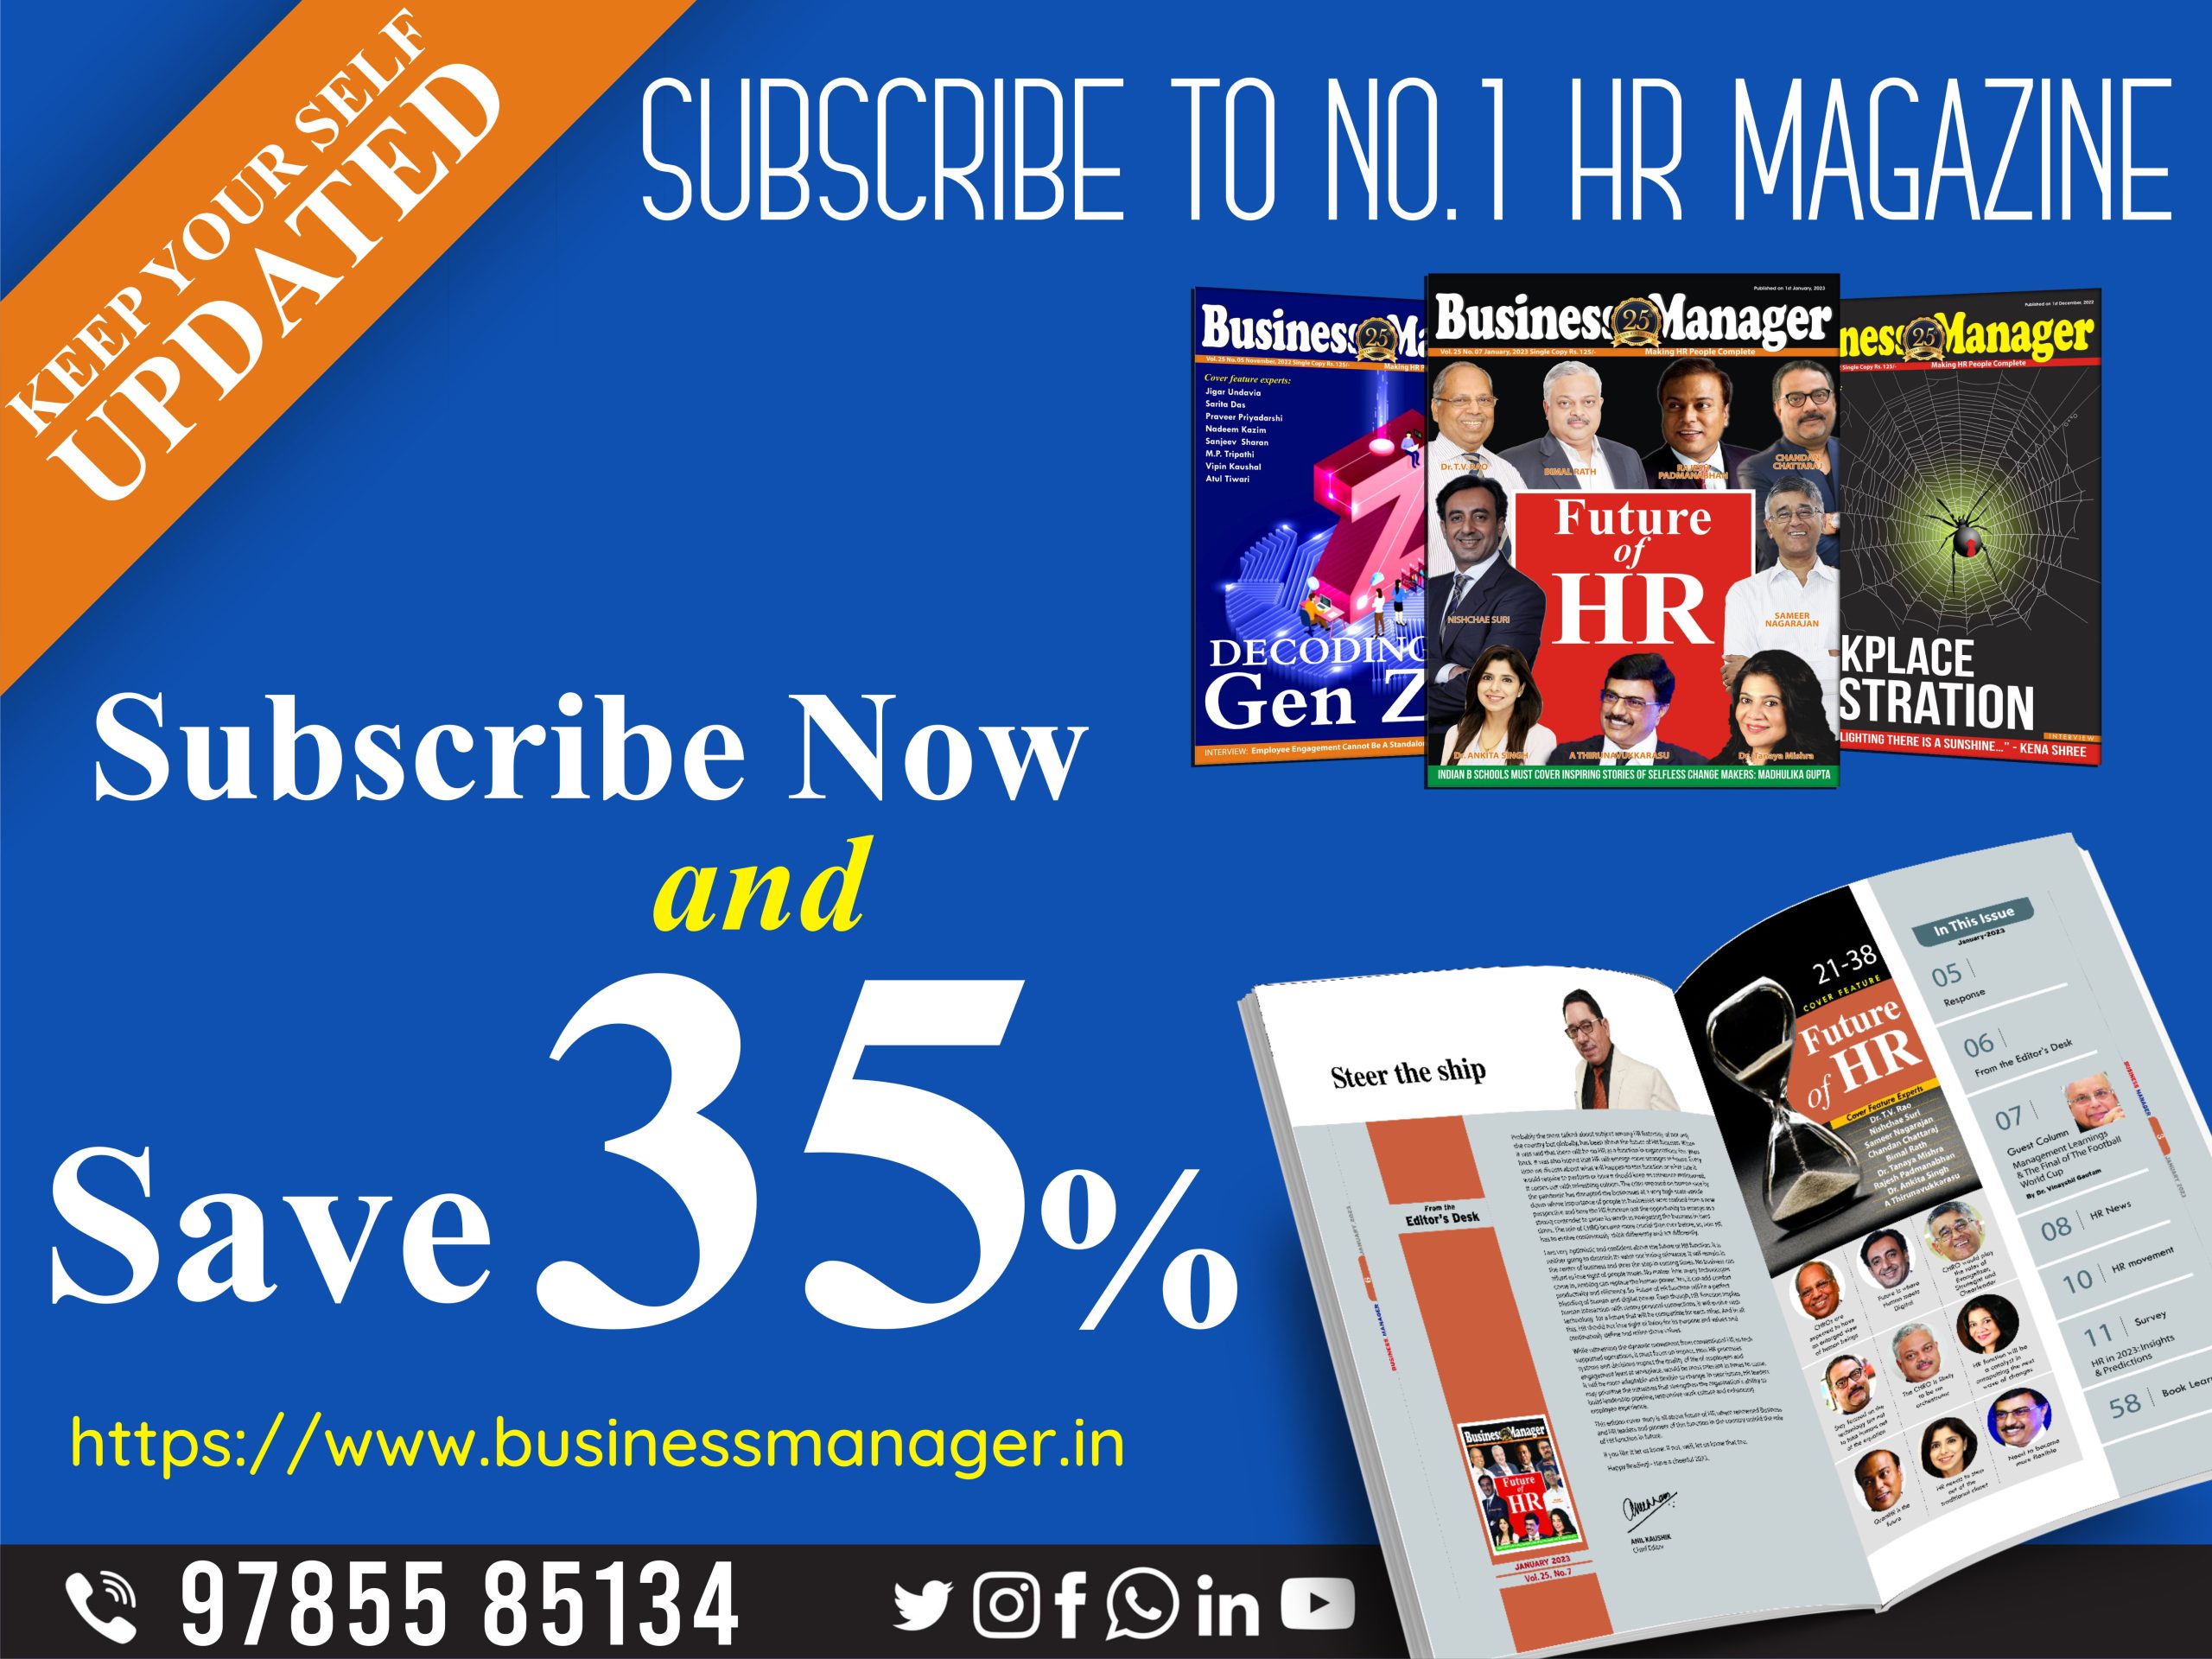 Subscribe to India's Best HR Magazine - Subscribe Now and SAVE 35%